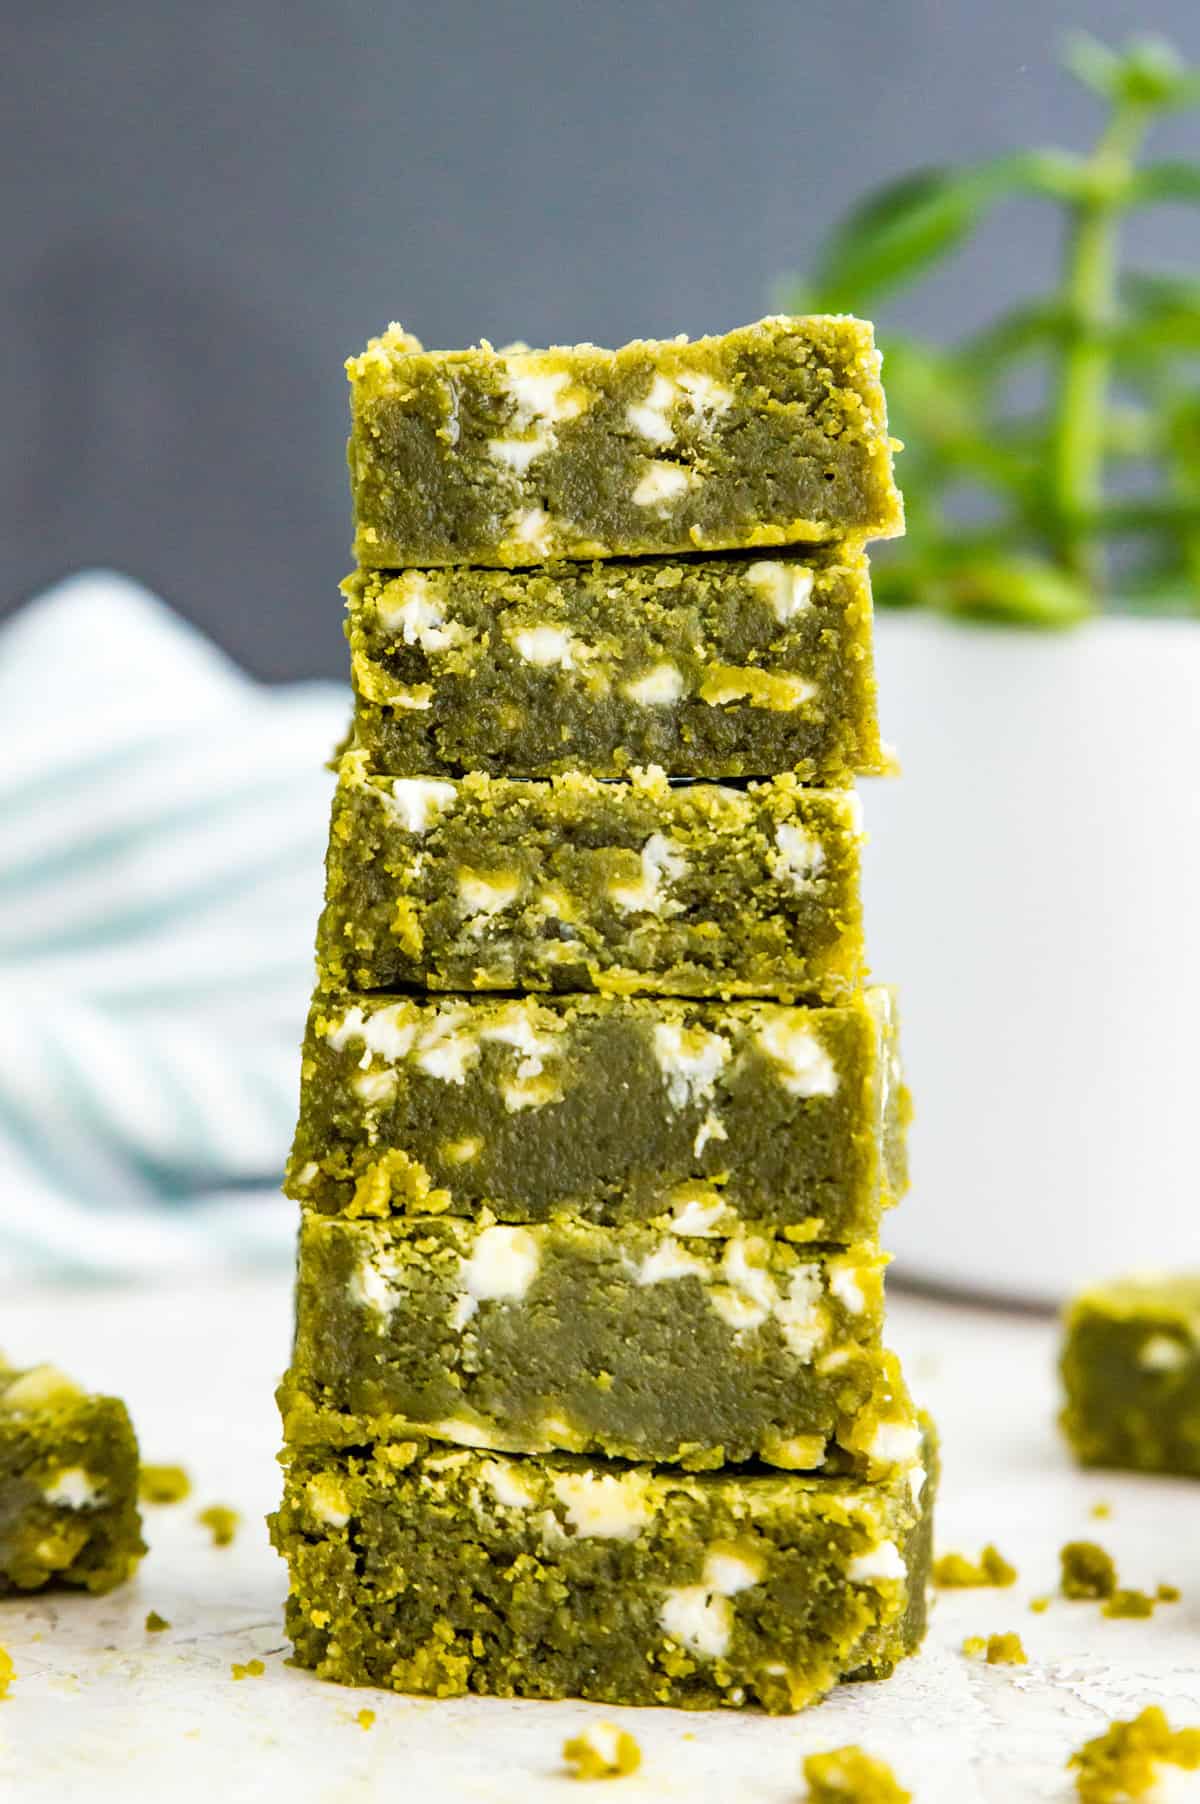 A stack of 6 green matcha brownies with a green plant behind them.